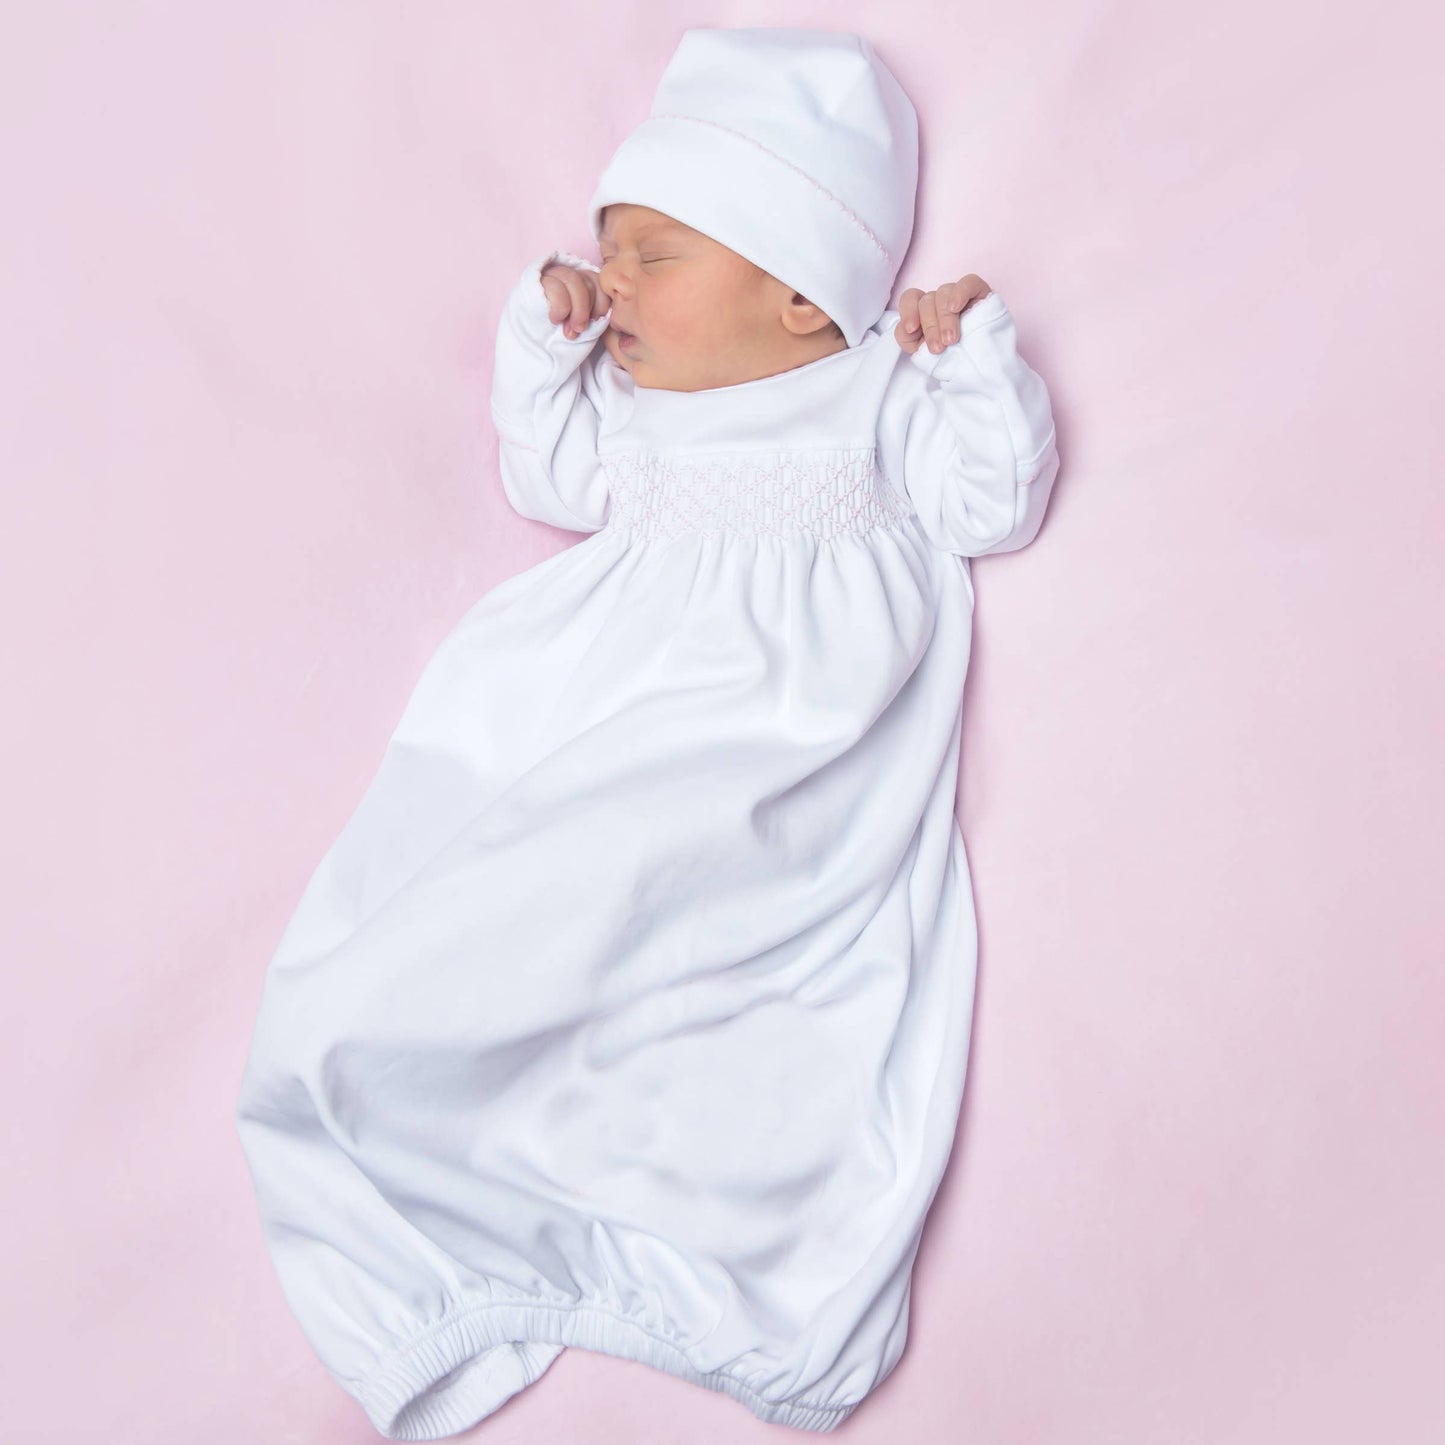 Solid Essentials White Pink Smocked Gown